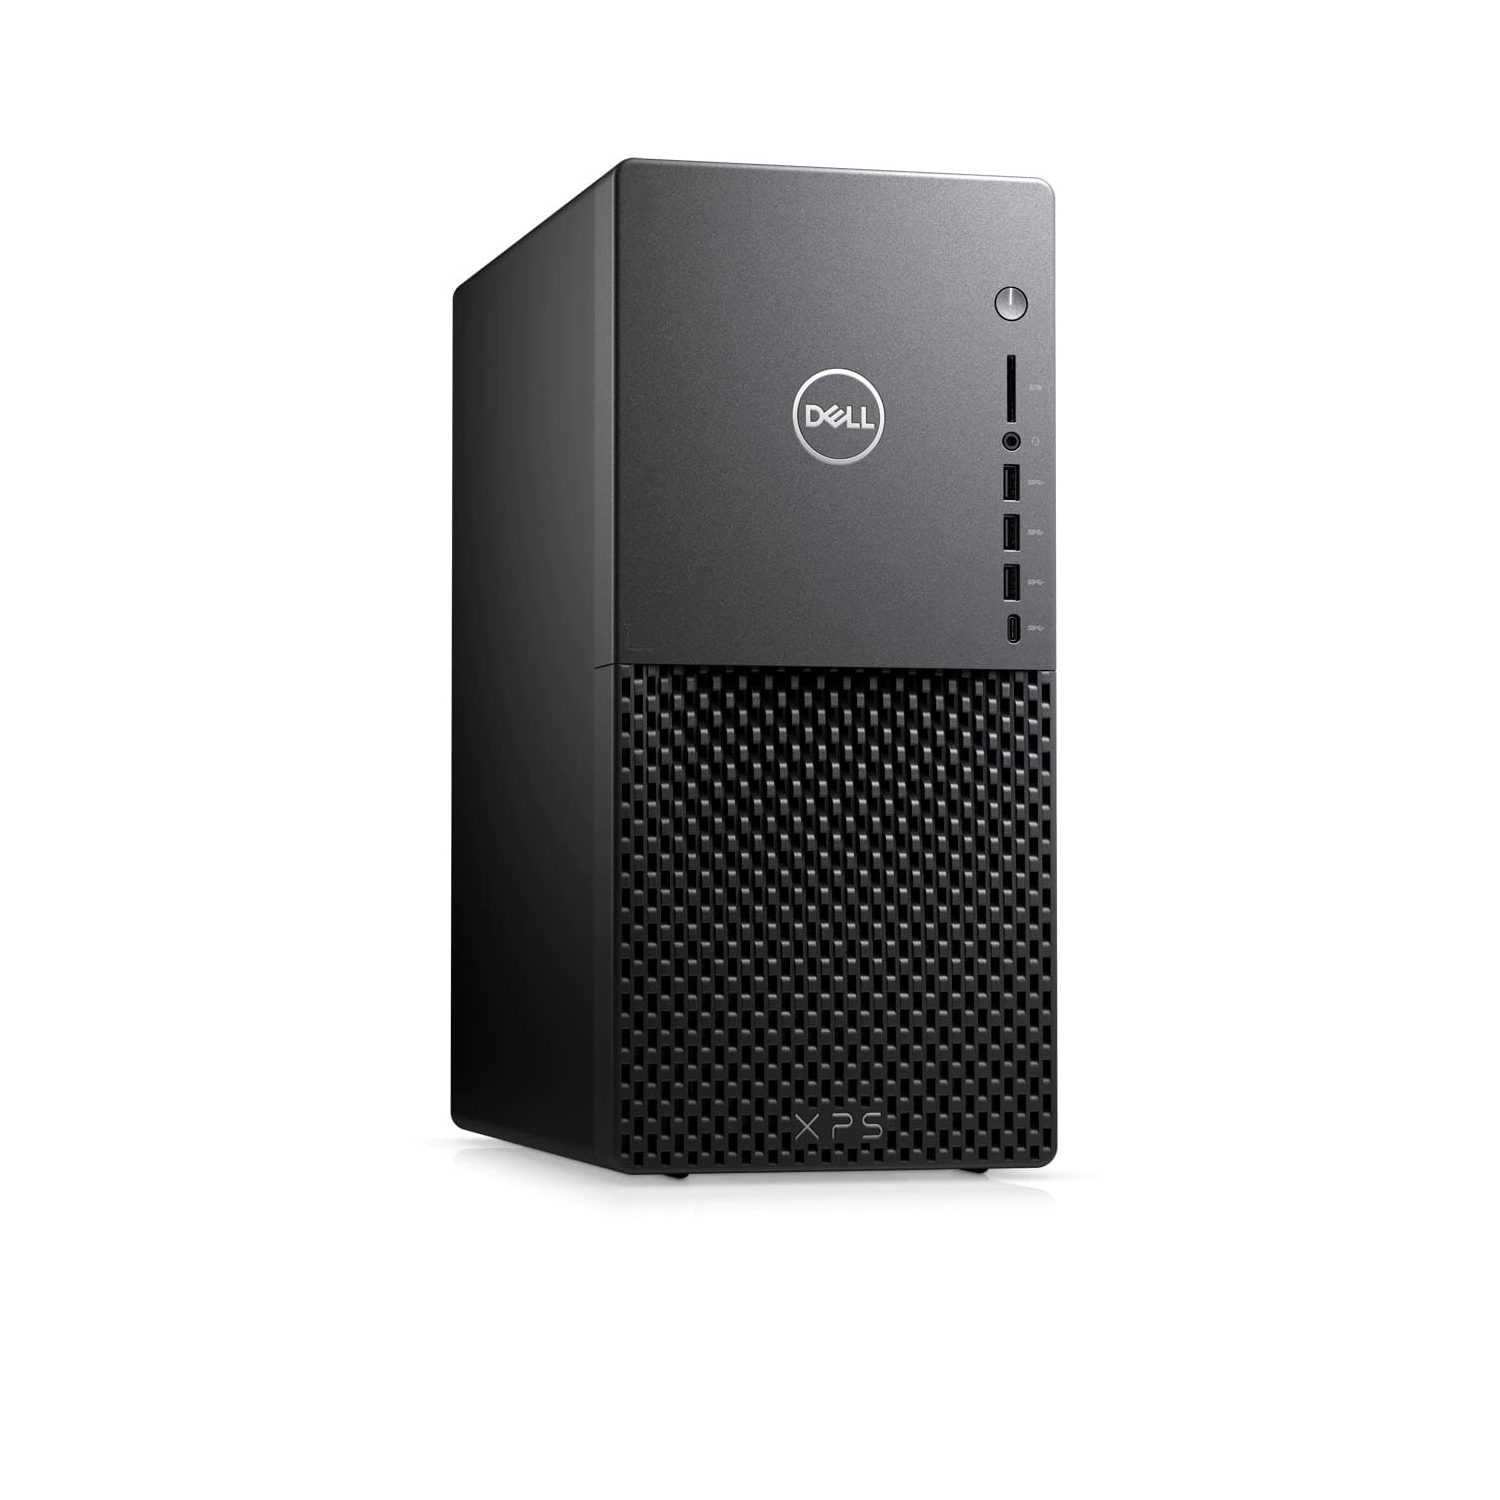 Refurbished (Excellent) - Dell XPS 8940 Desktop (2020) | Core i7 - 1TB HDD + 256GB SSD - 16GB RAM - GTX 1660 | 8 Cores @ 4.8 GHz - 10th Gen CPU Certified Refurbished